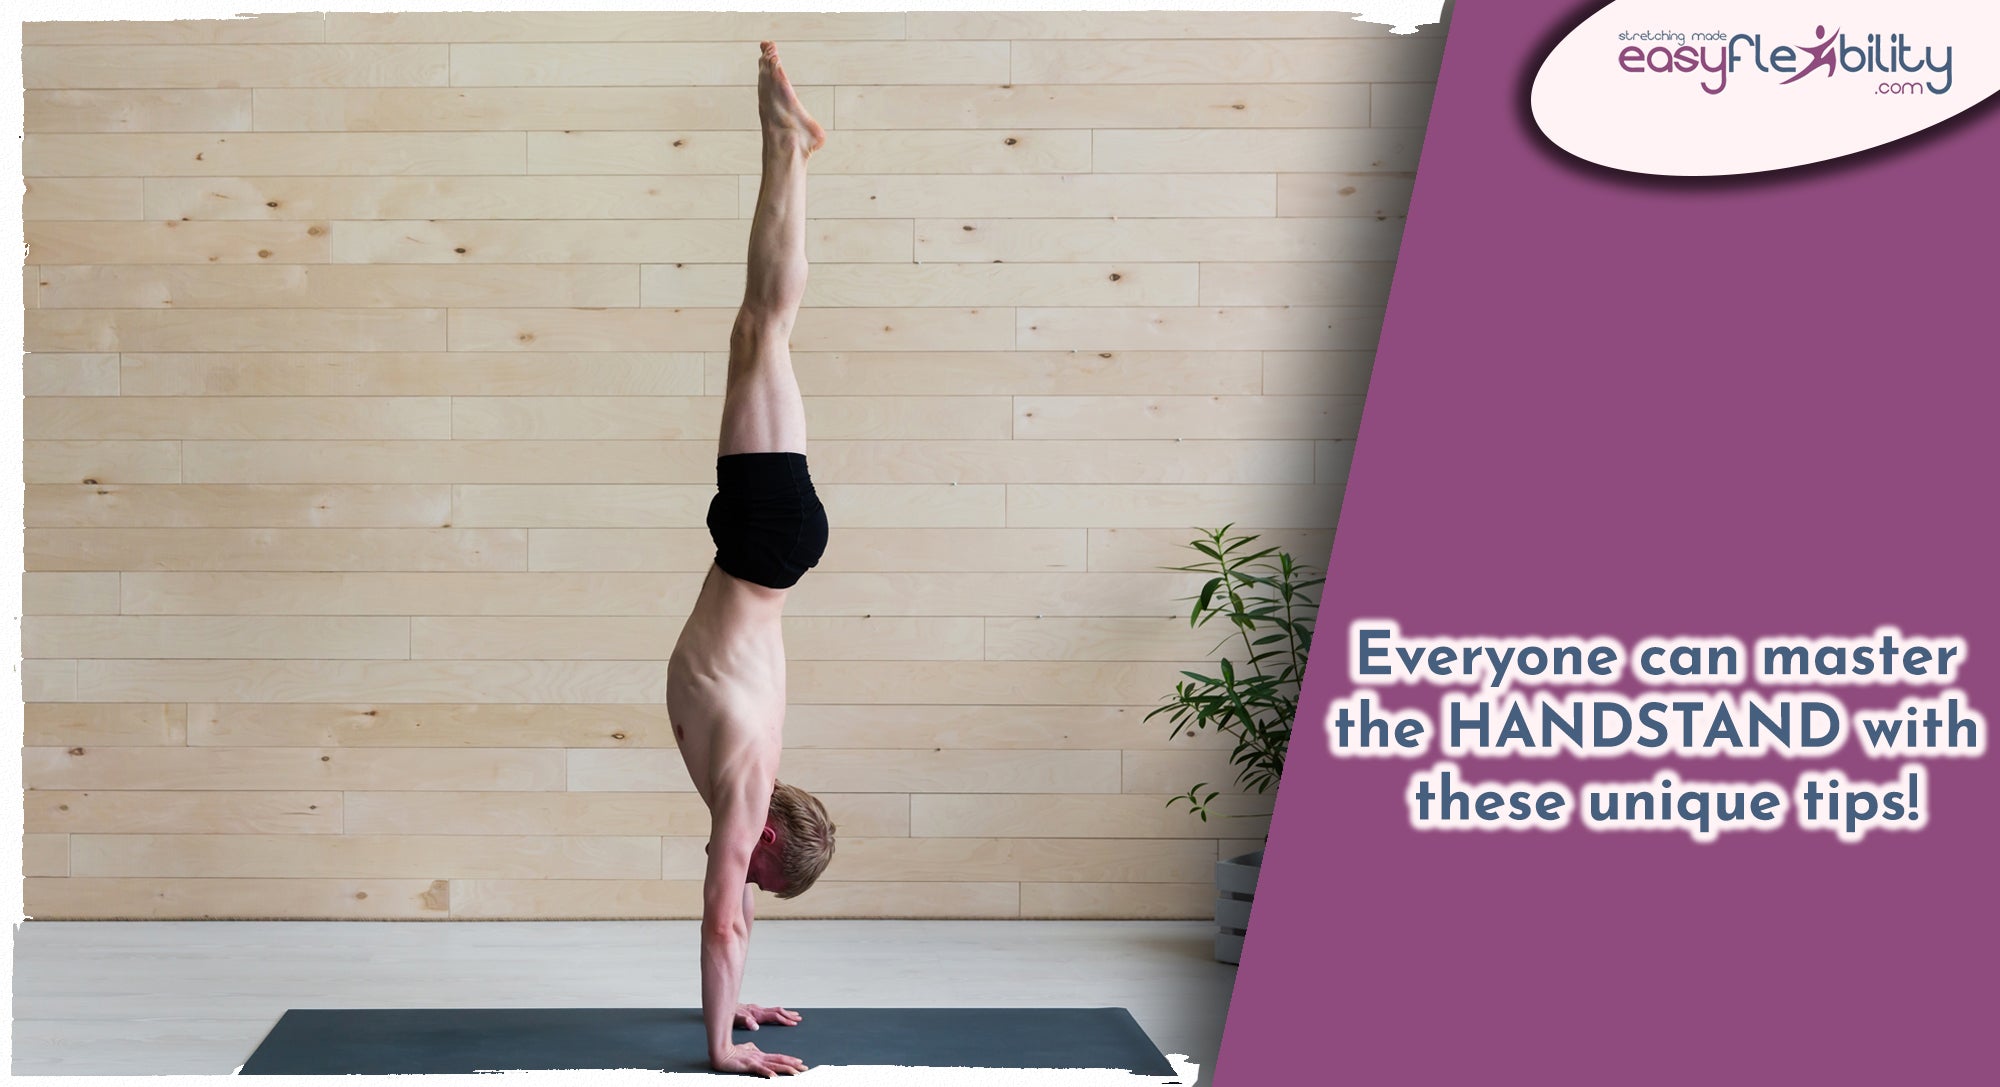 Everyone can master the HANDSTAND with these unique tips. Open for a cool free tip